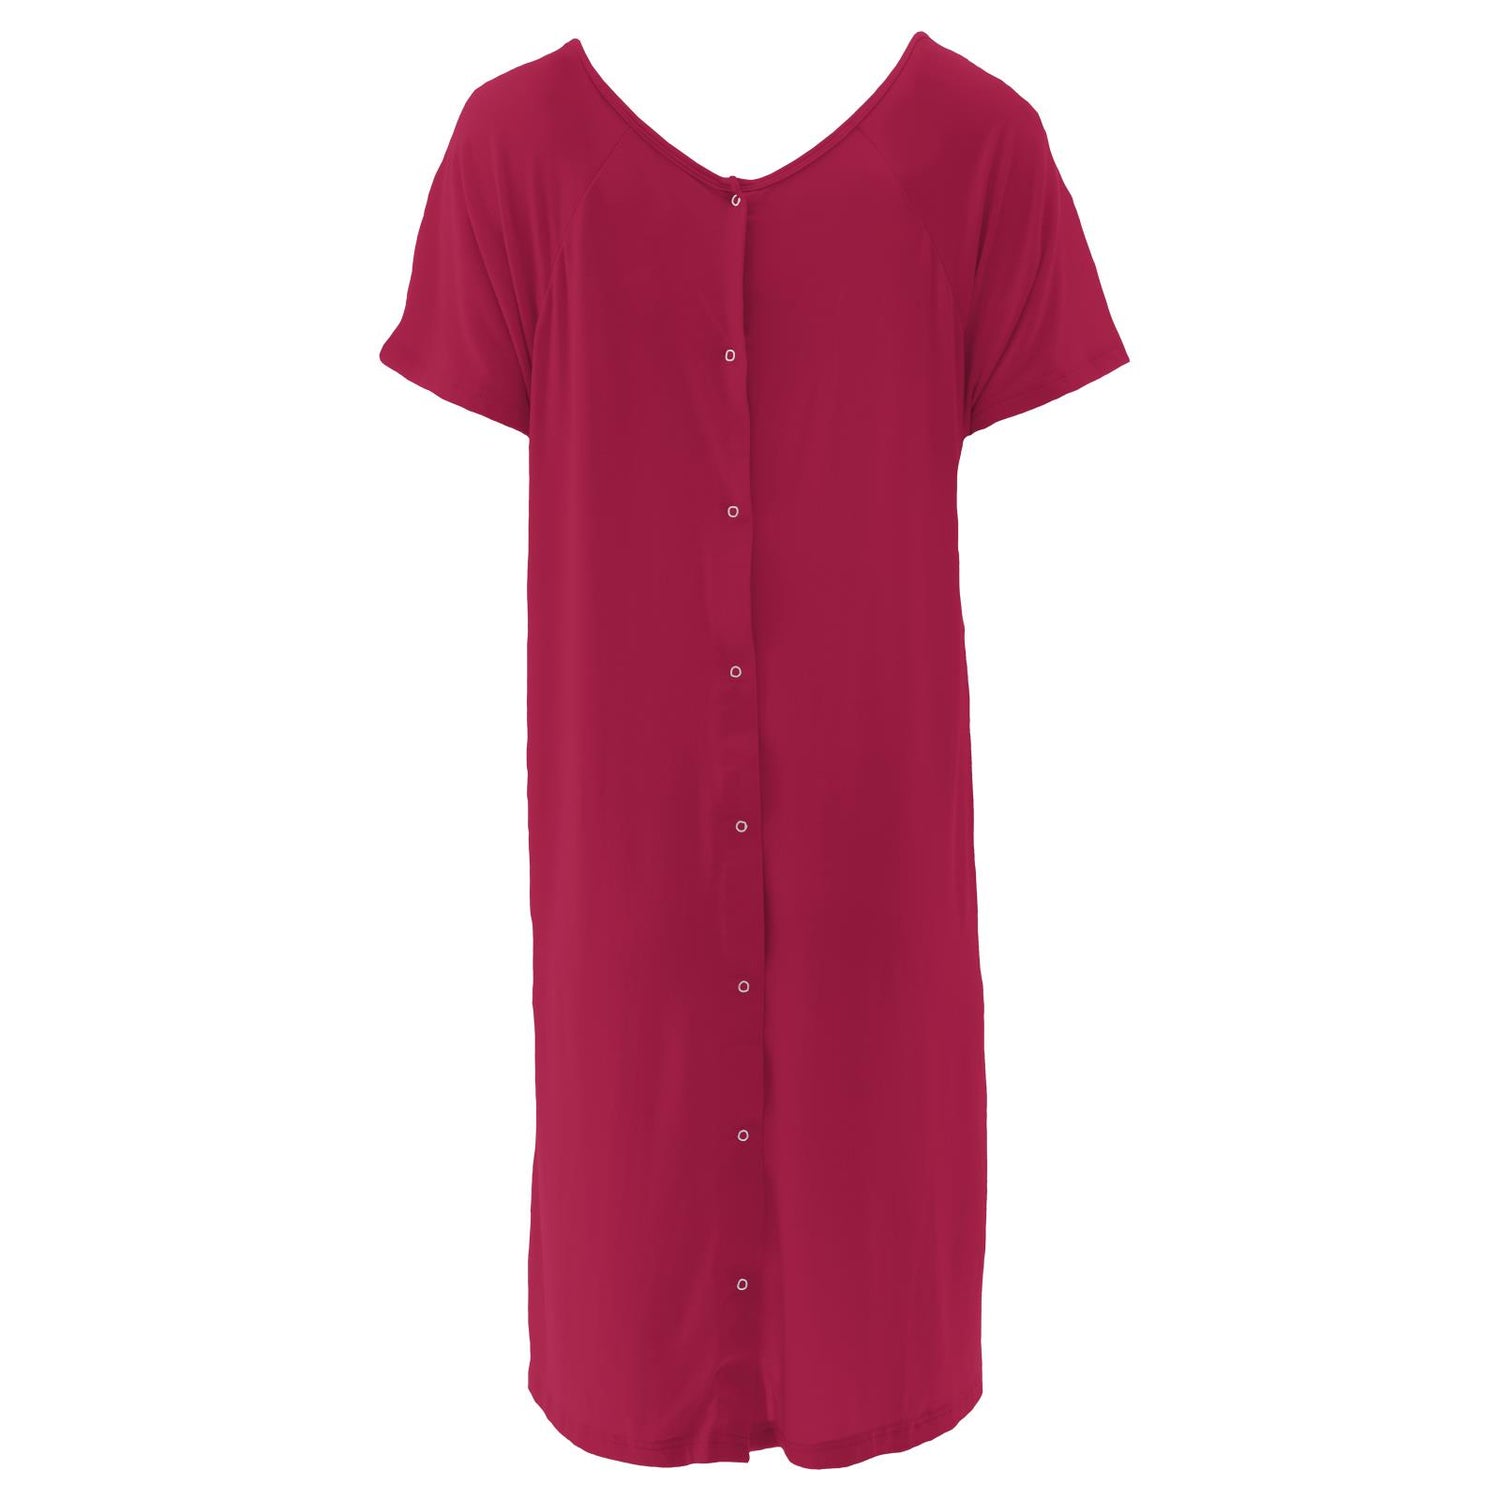 Women's Hospital Gown in Rhododendron